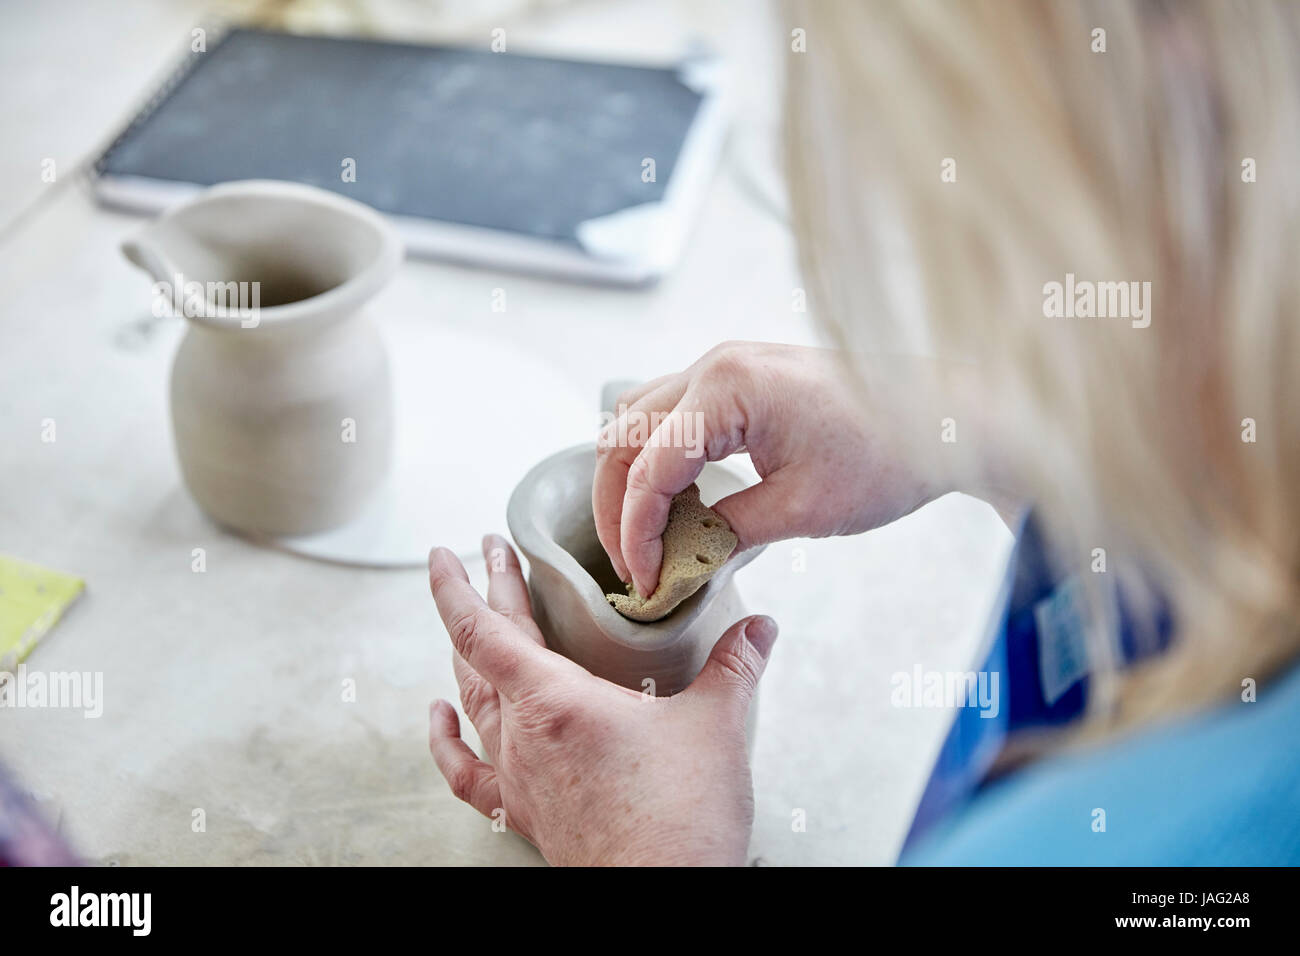 A woman using her hands to shape and smooth a wet clay jug to match another, making a pair. Stock Photo